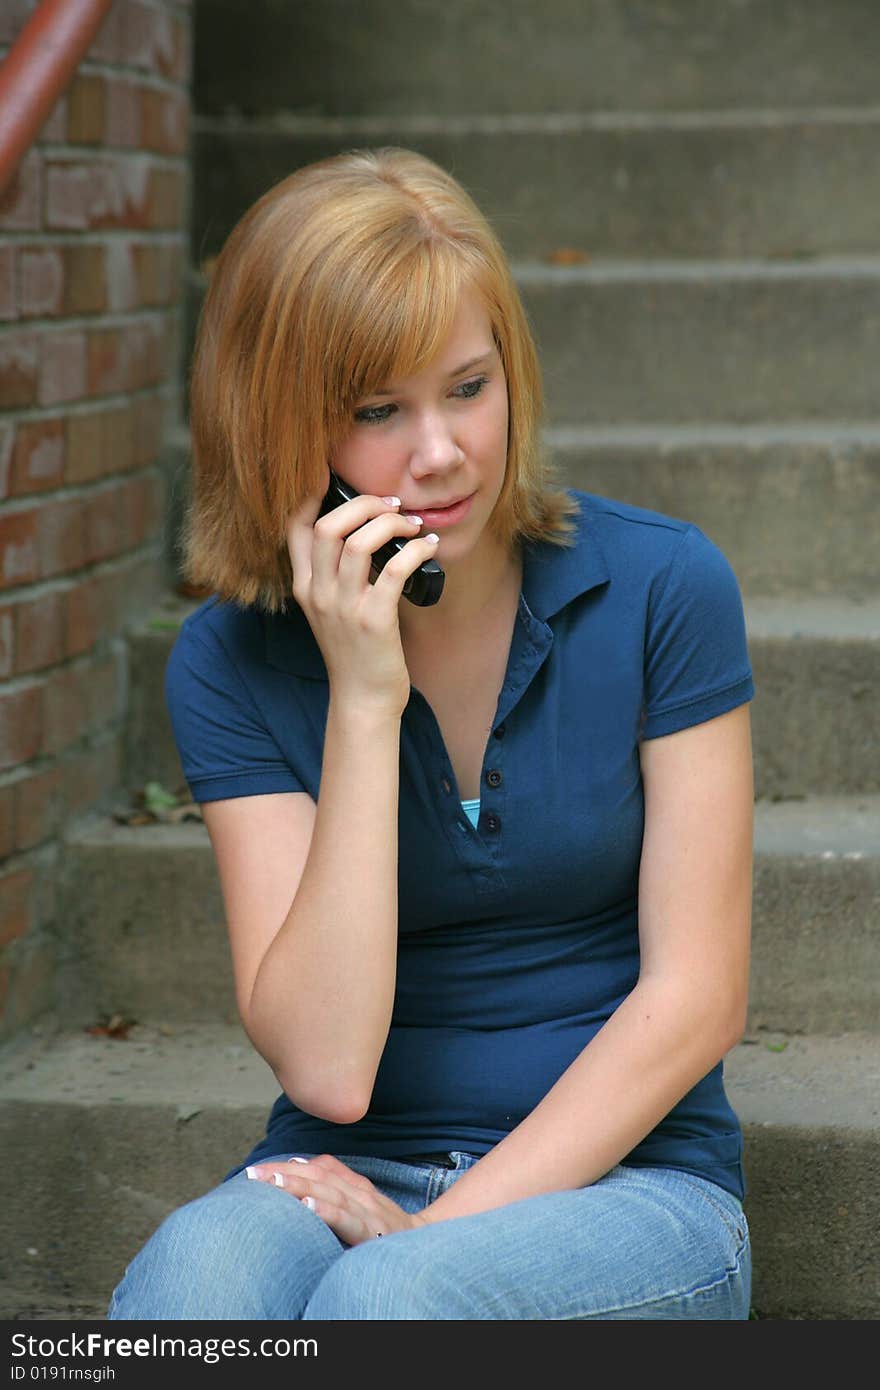 A teenage girl chats happily on her cell phone on the outdoor stairs of a college campus with space for copy. Technology, communications, lifestyle concept. A teenage girl chats happily on her cell phone on the outdoor stairs of a college campus with space for copy. Technology, communications, lifestyle concept.